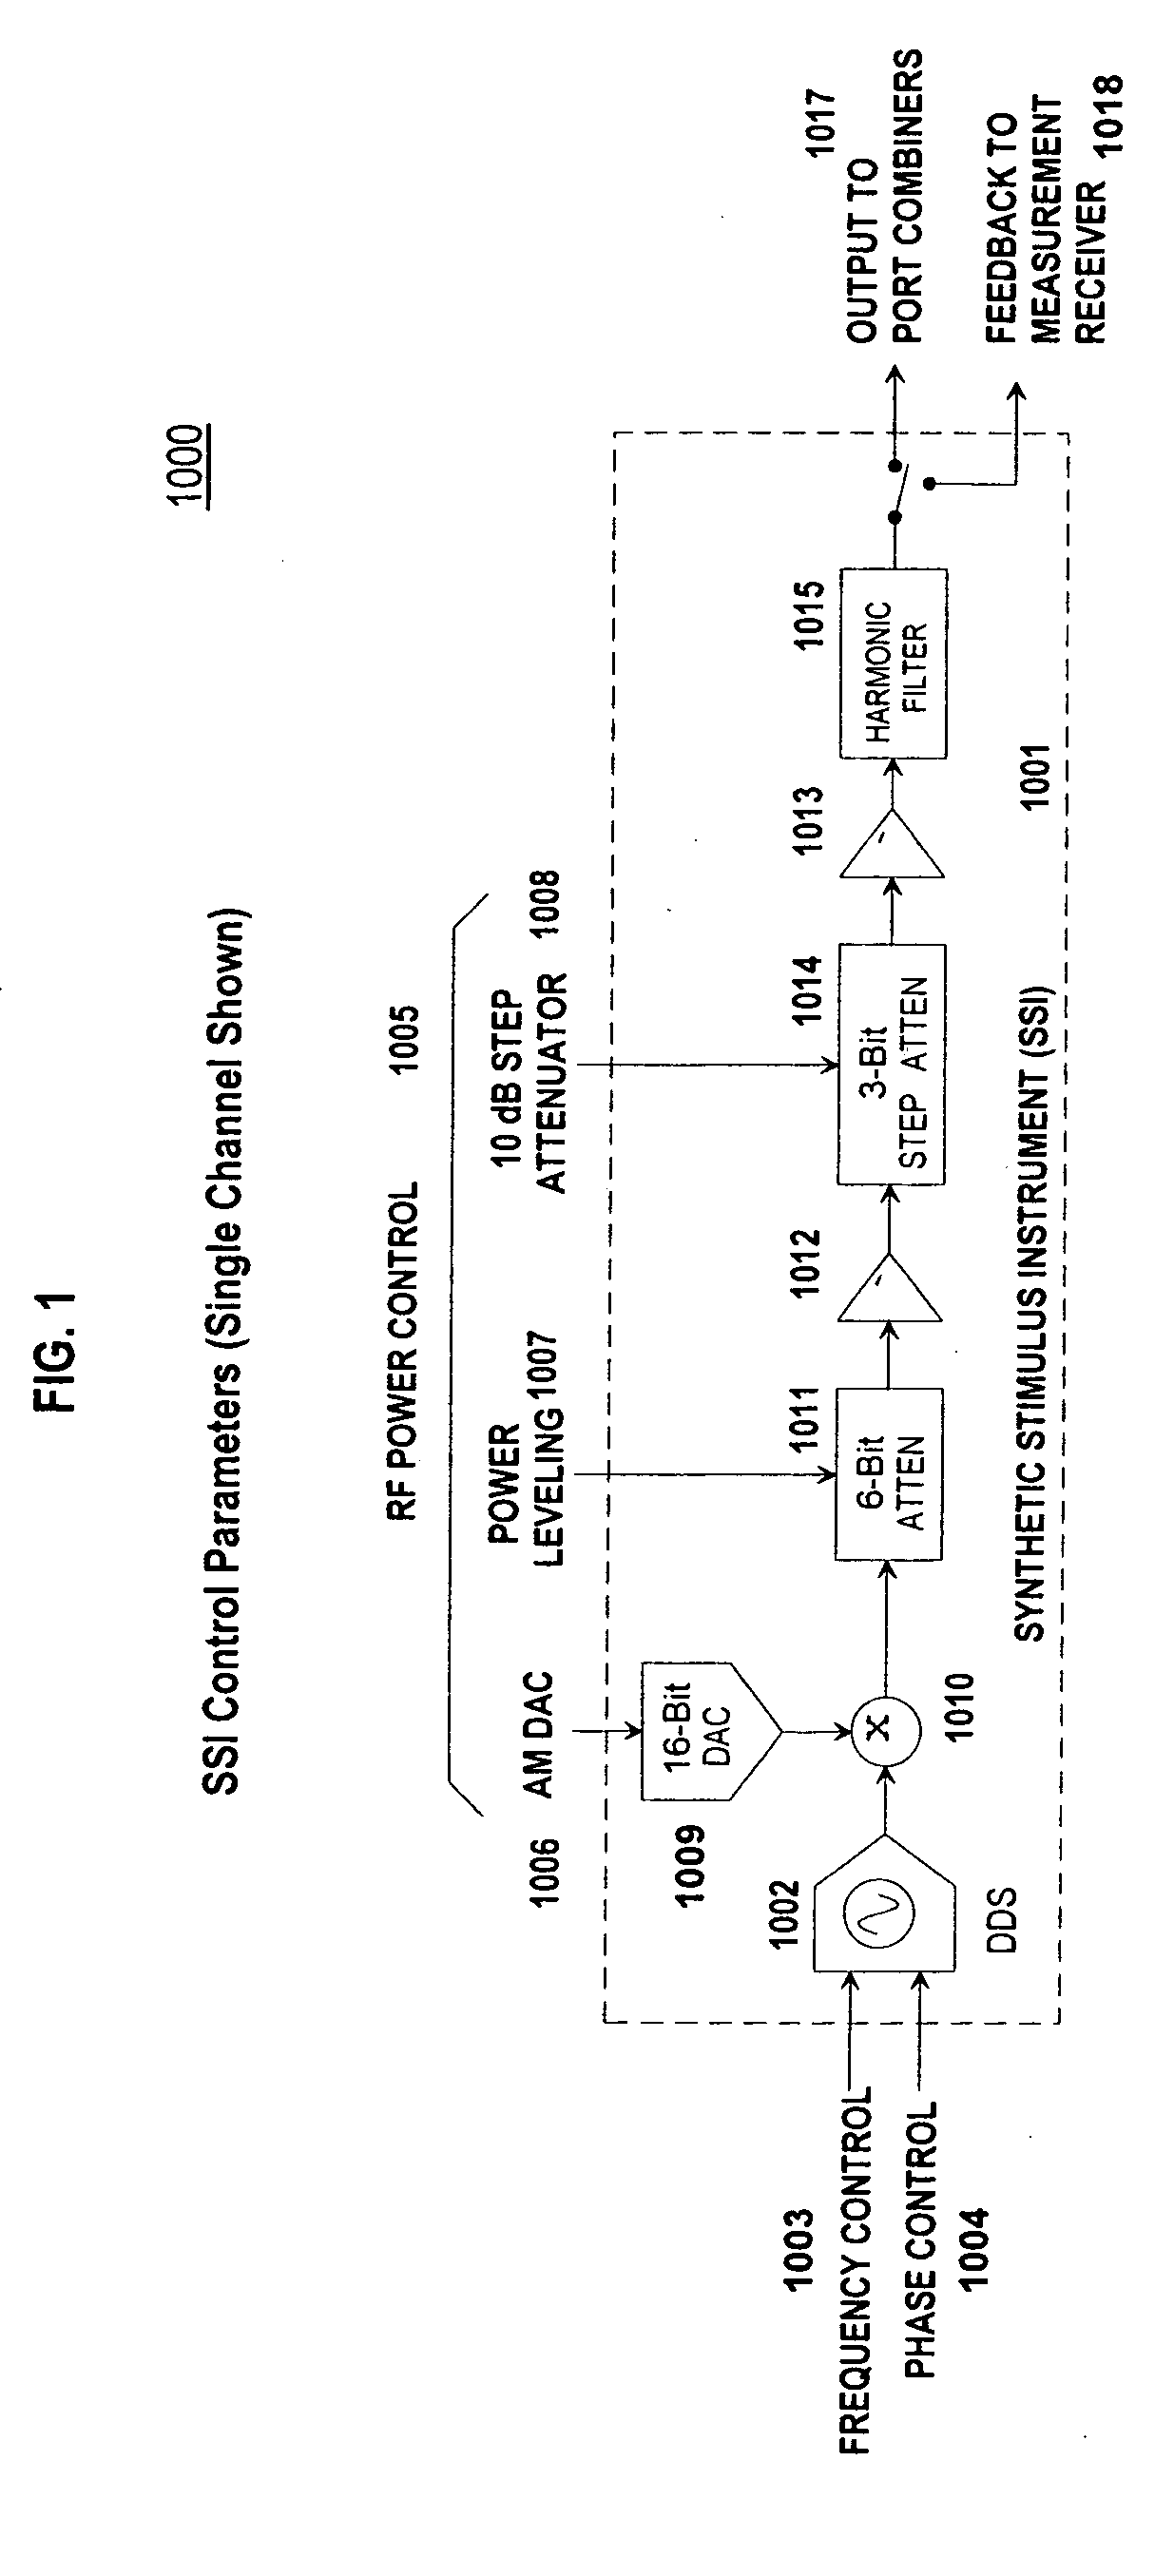 Method for implementing continuous radio frequency (RF) alignment in advanced electronic warfare (EW) signal stimulation systems